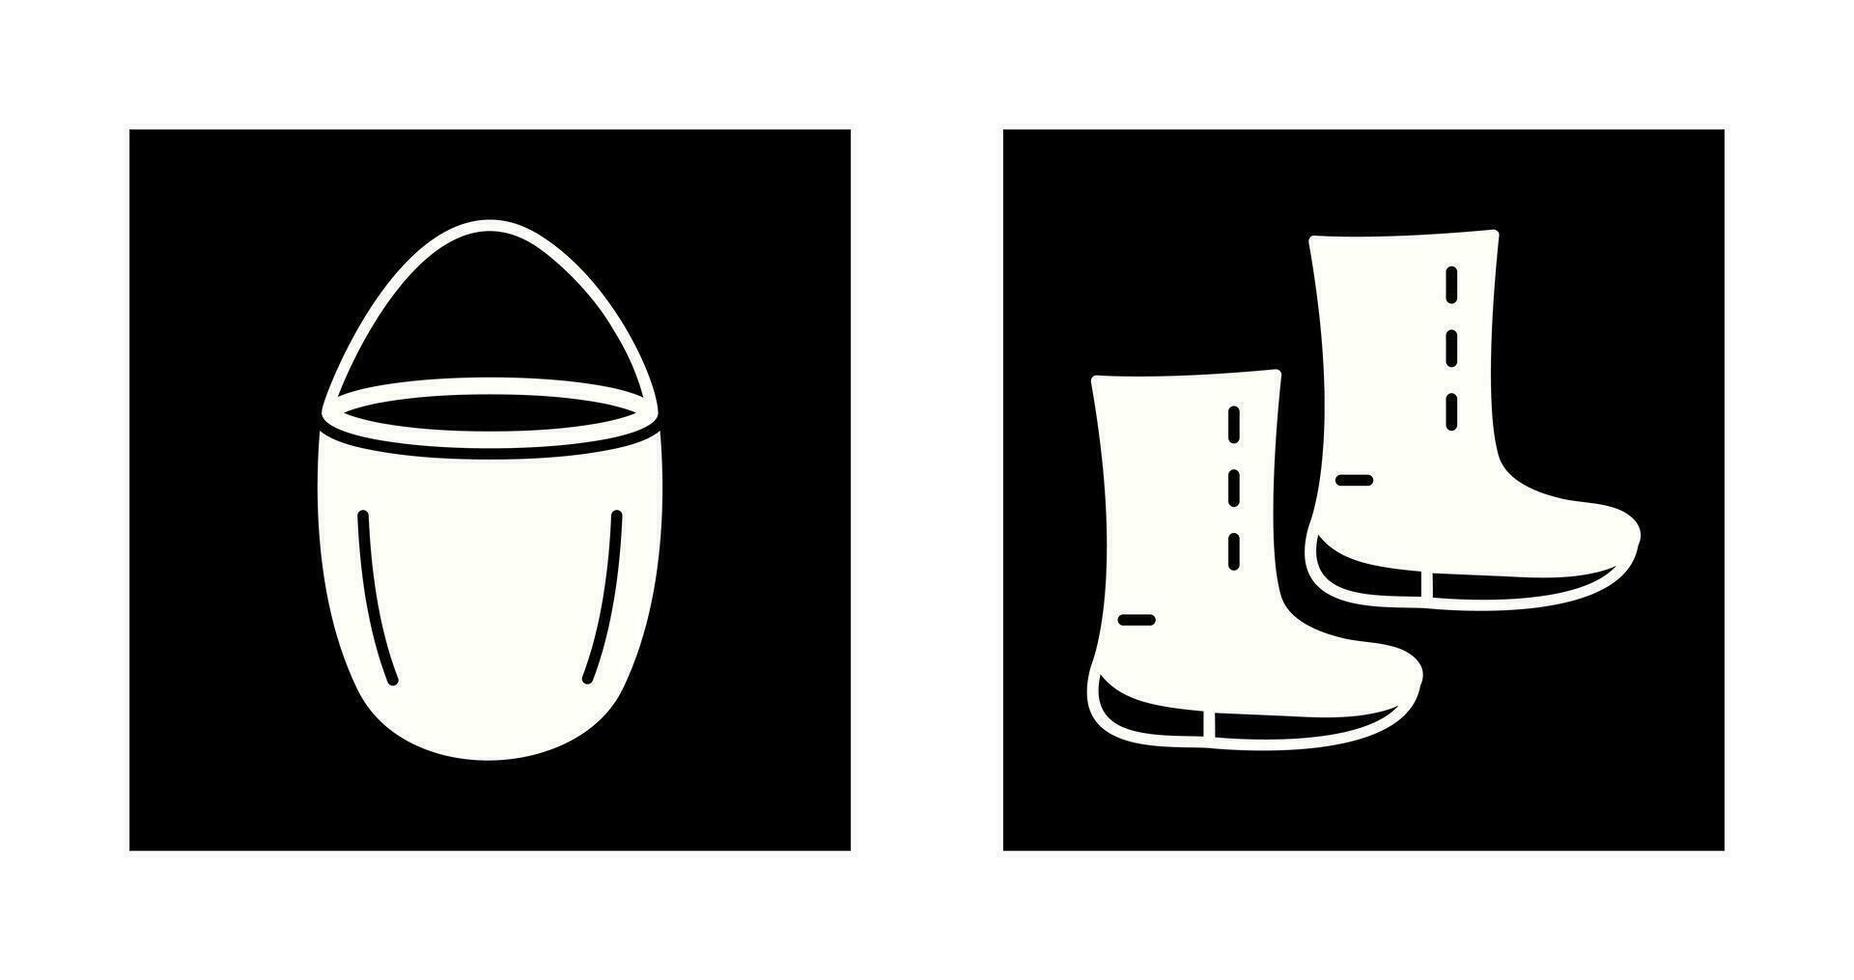 water bucket and boots Icon vector